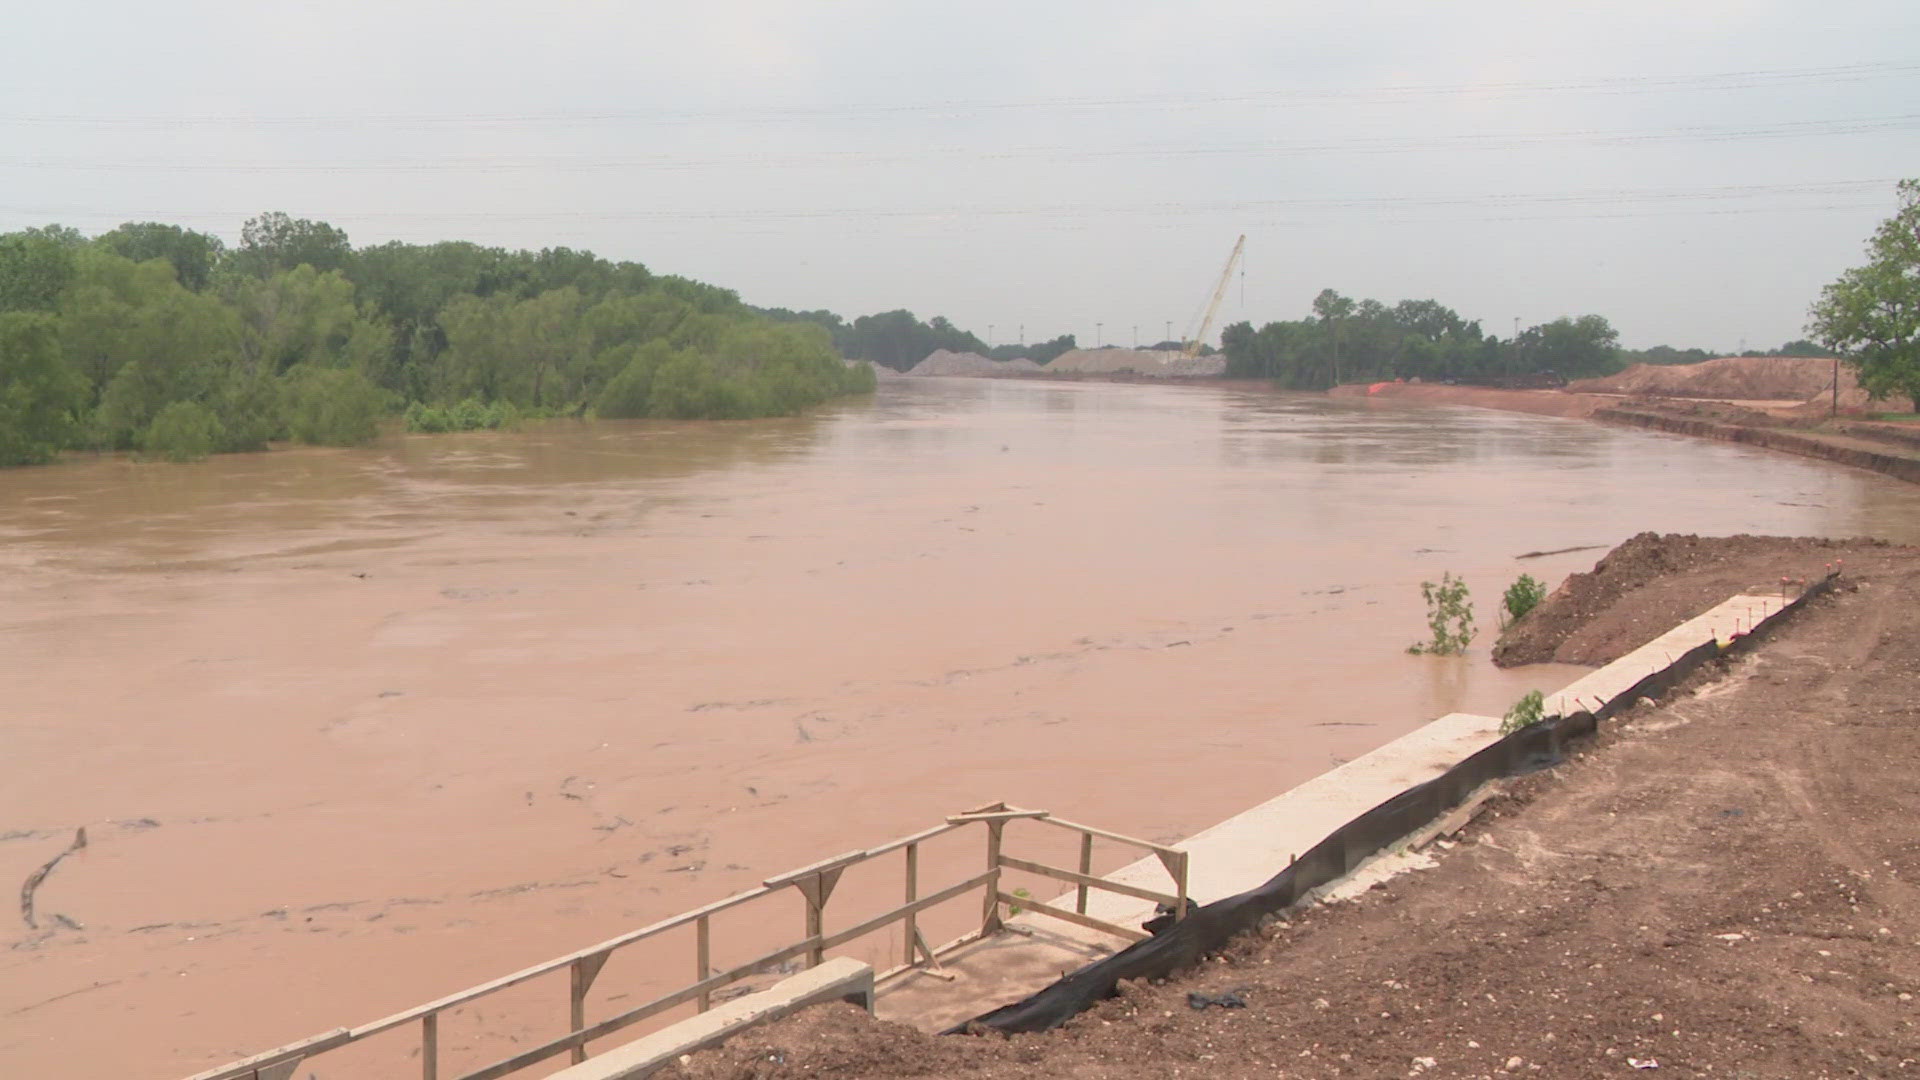 The Brazos River is rising about a foot each day and with rain in this weekend's forecast, the river could cause minor flooding for some parts of Fort Bend County.